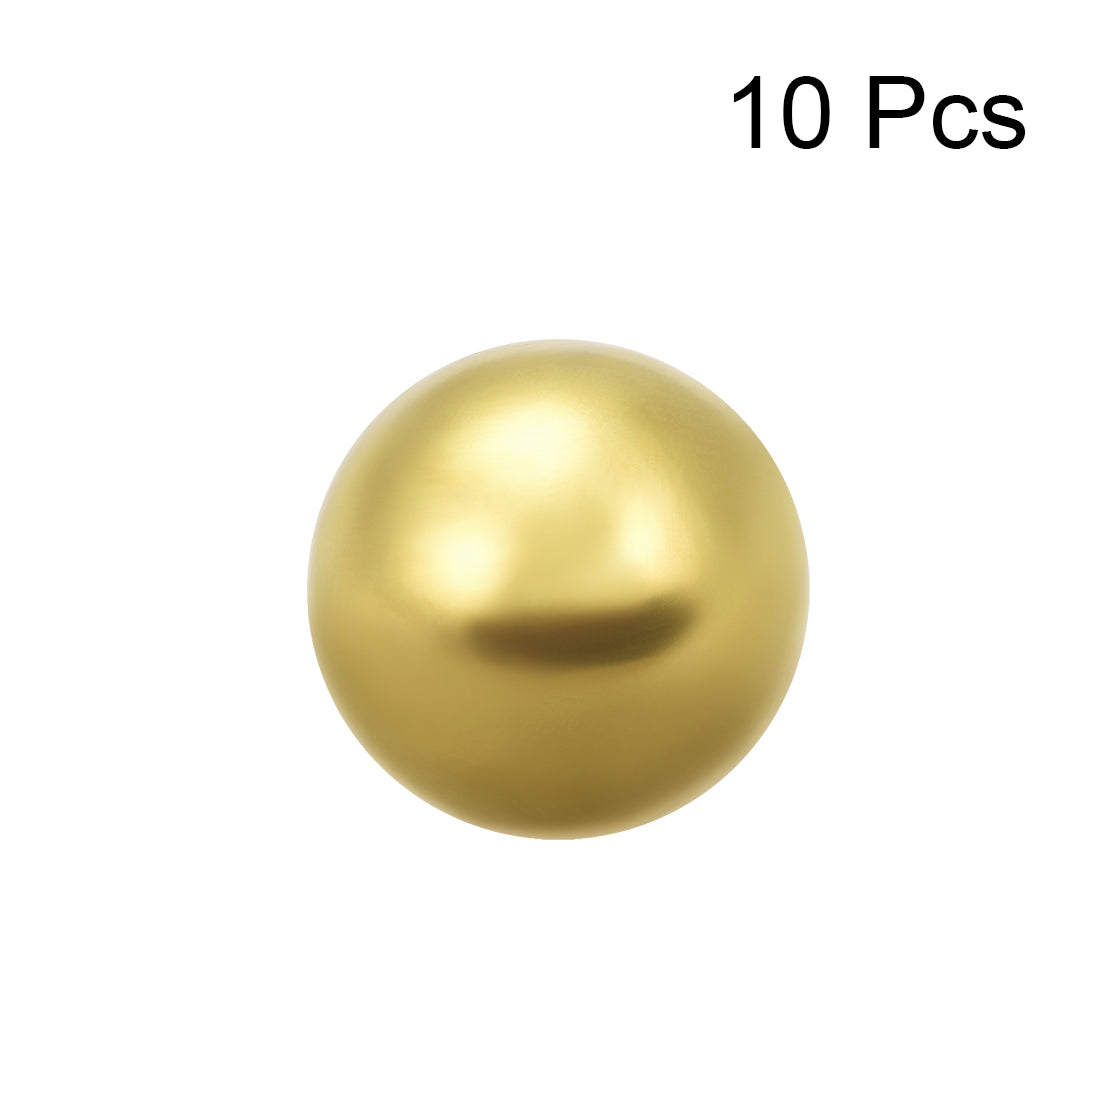 uxcell Uxcell 1/2-inch Precision Solid Brass Bearing Balls 10pcs